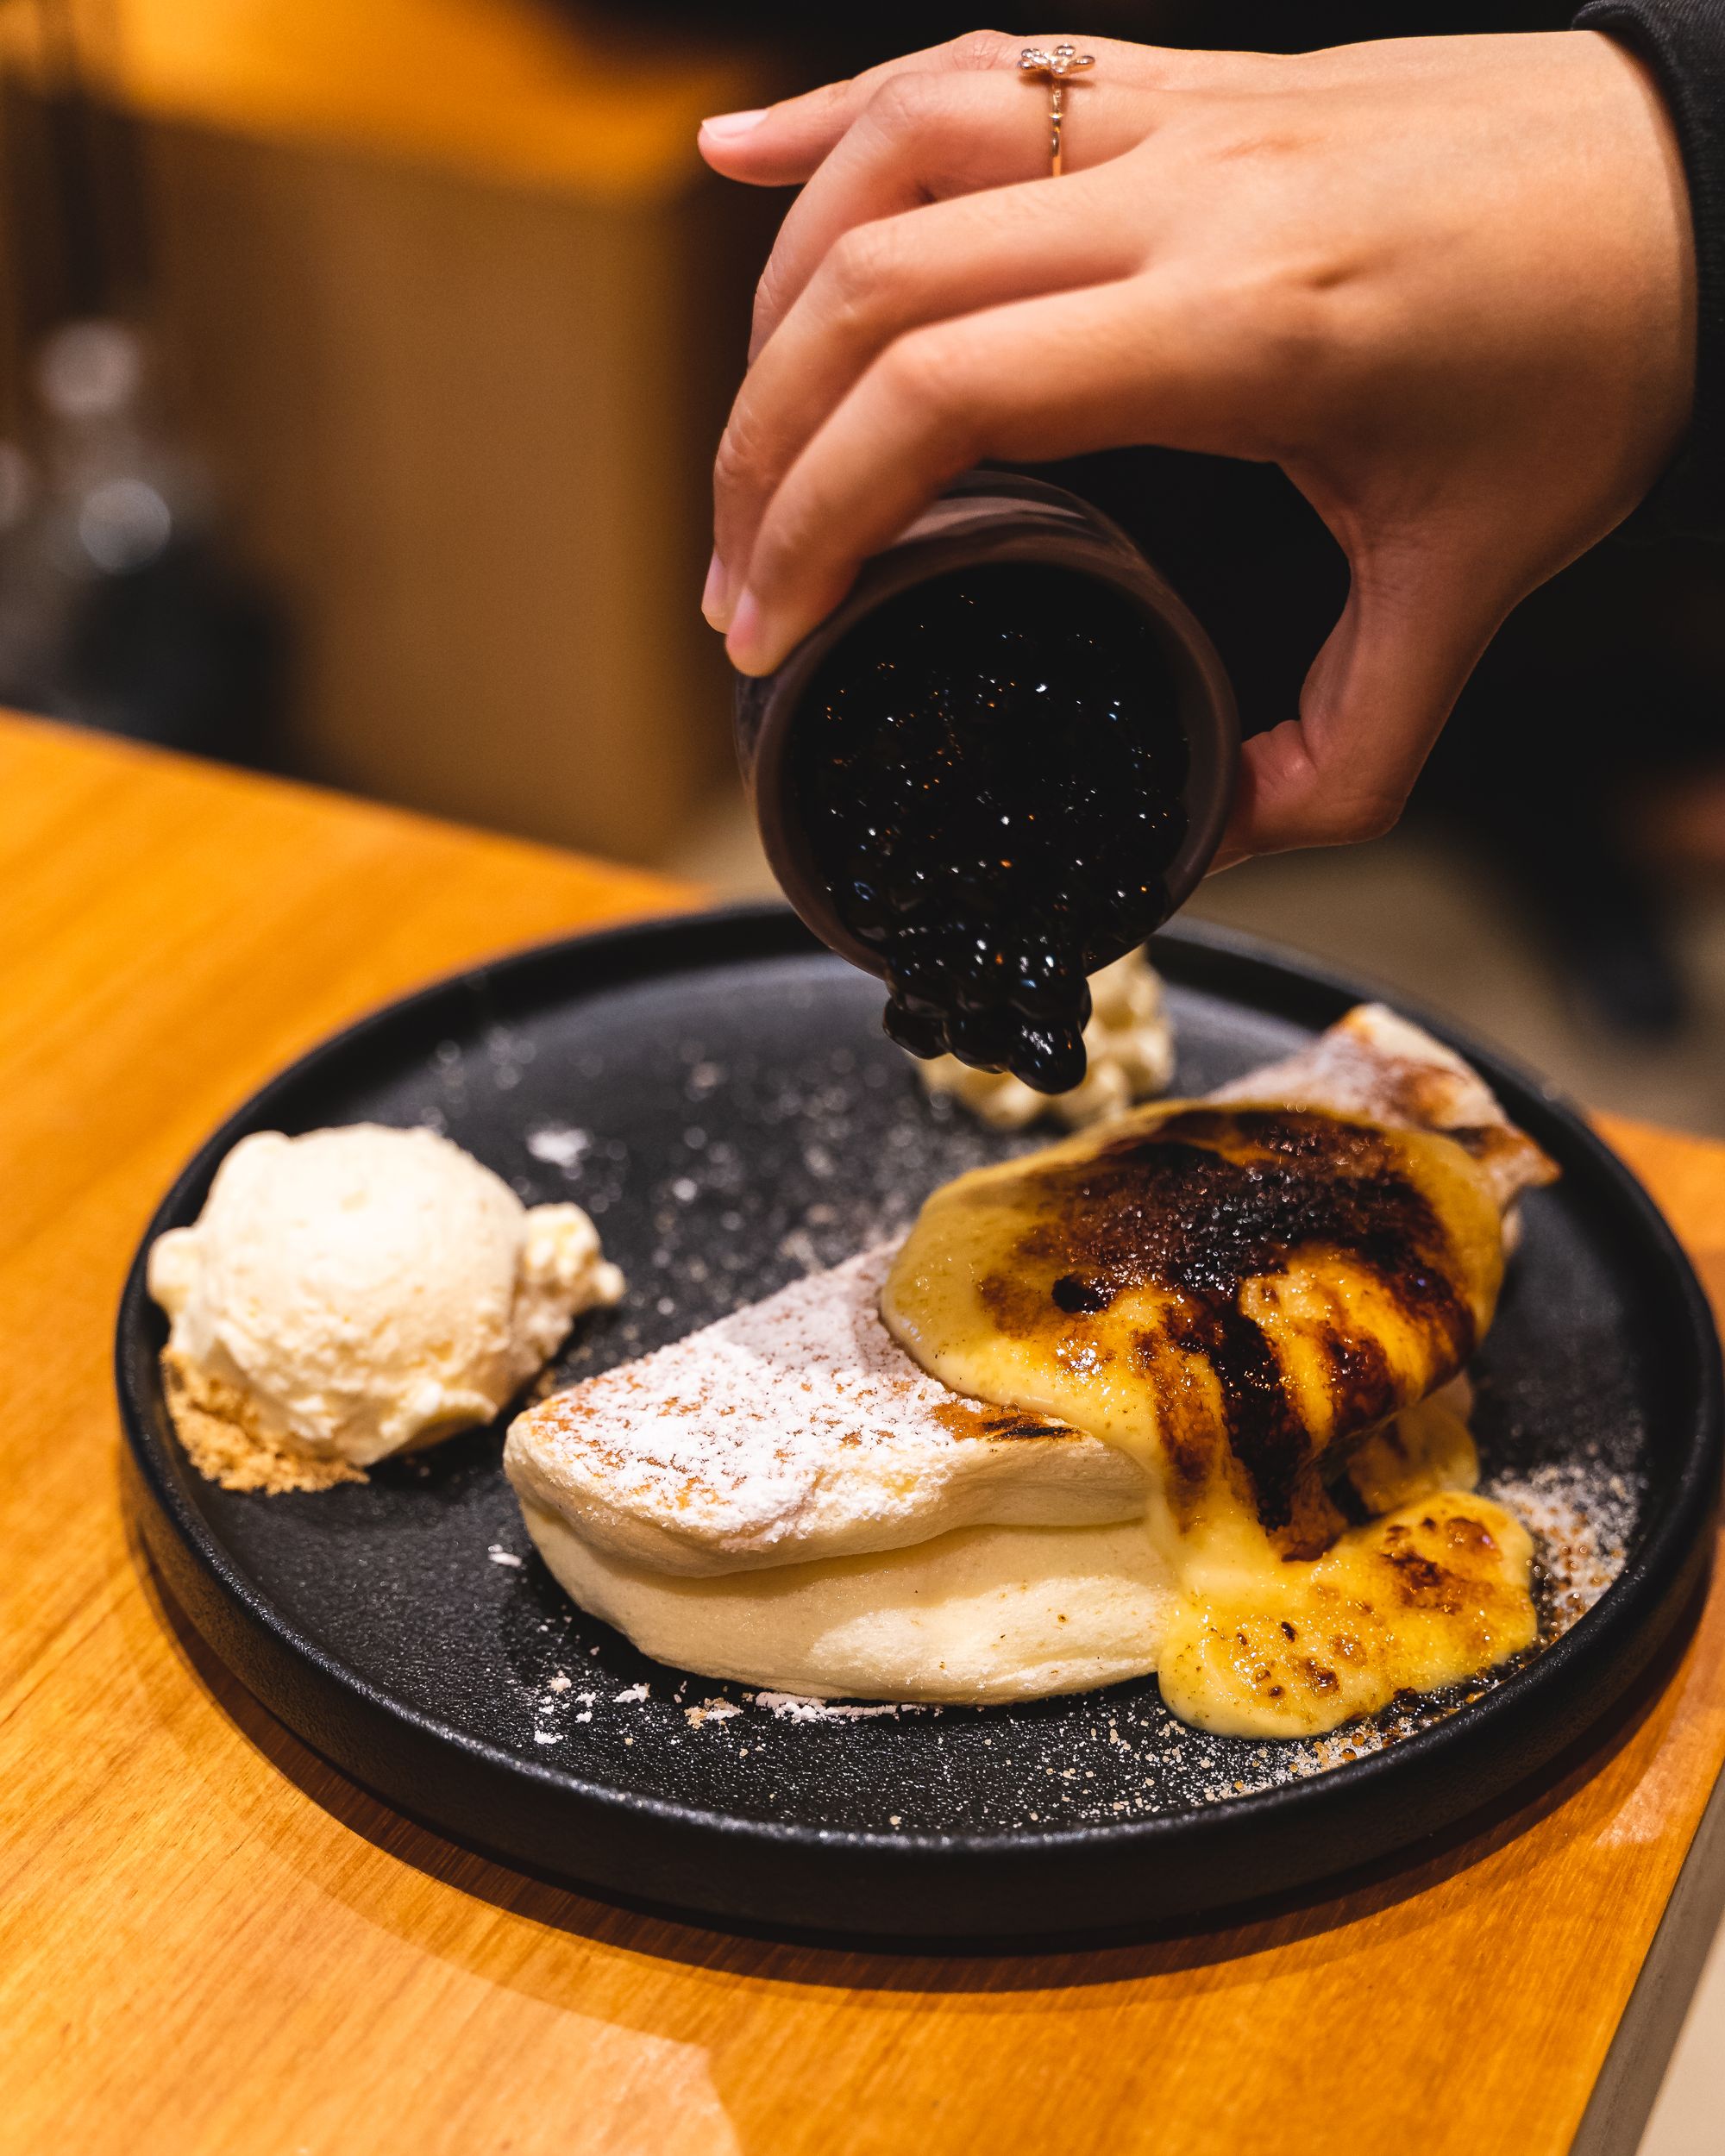 Hand pouring boba onto a souffle pancake on a plate with a side of ice-cream